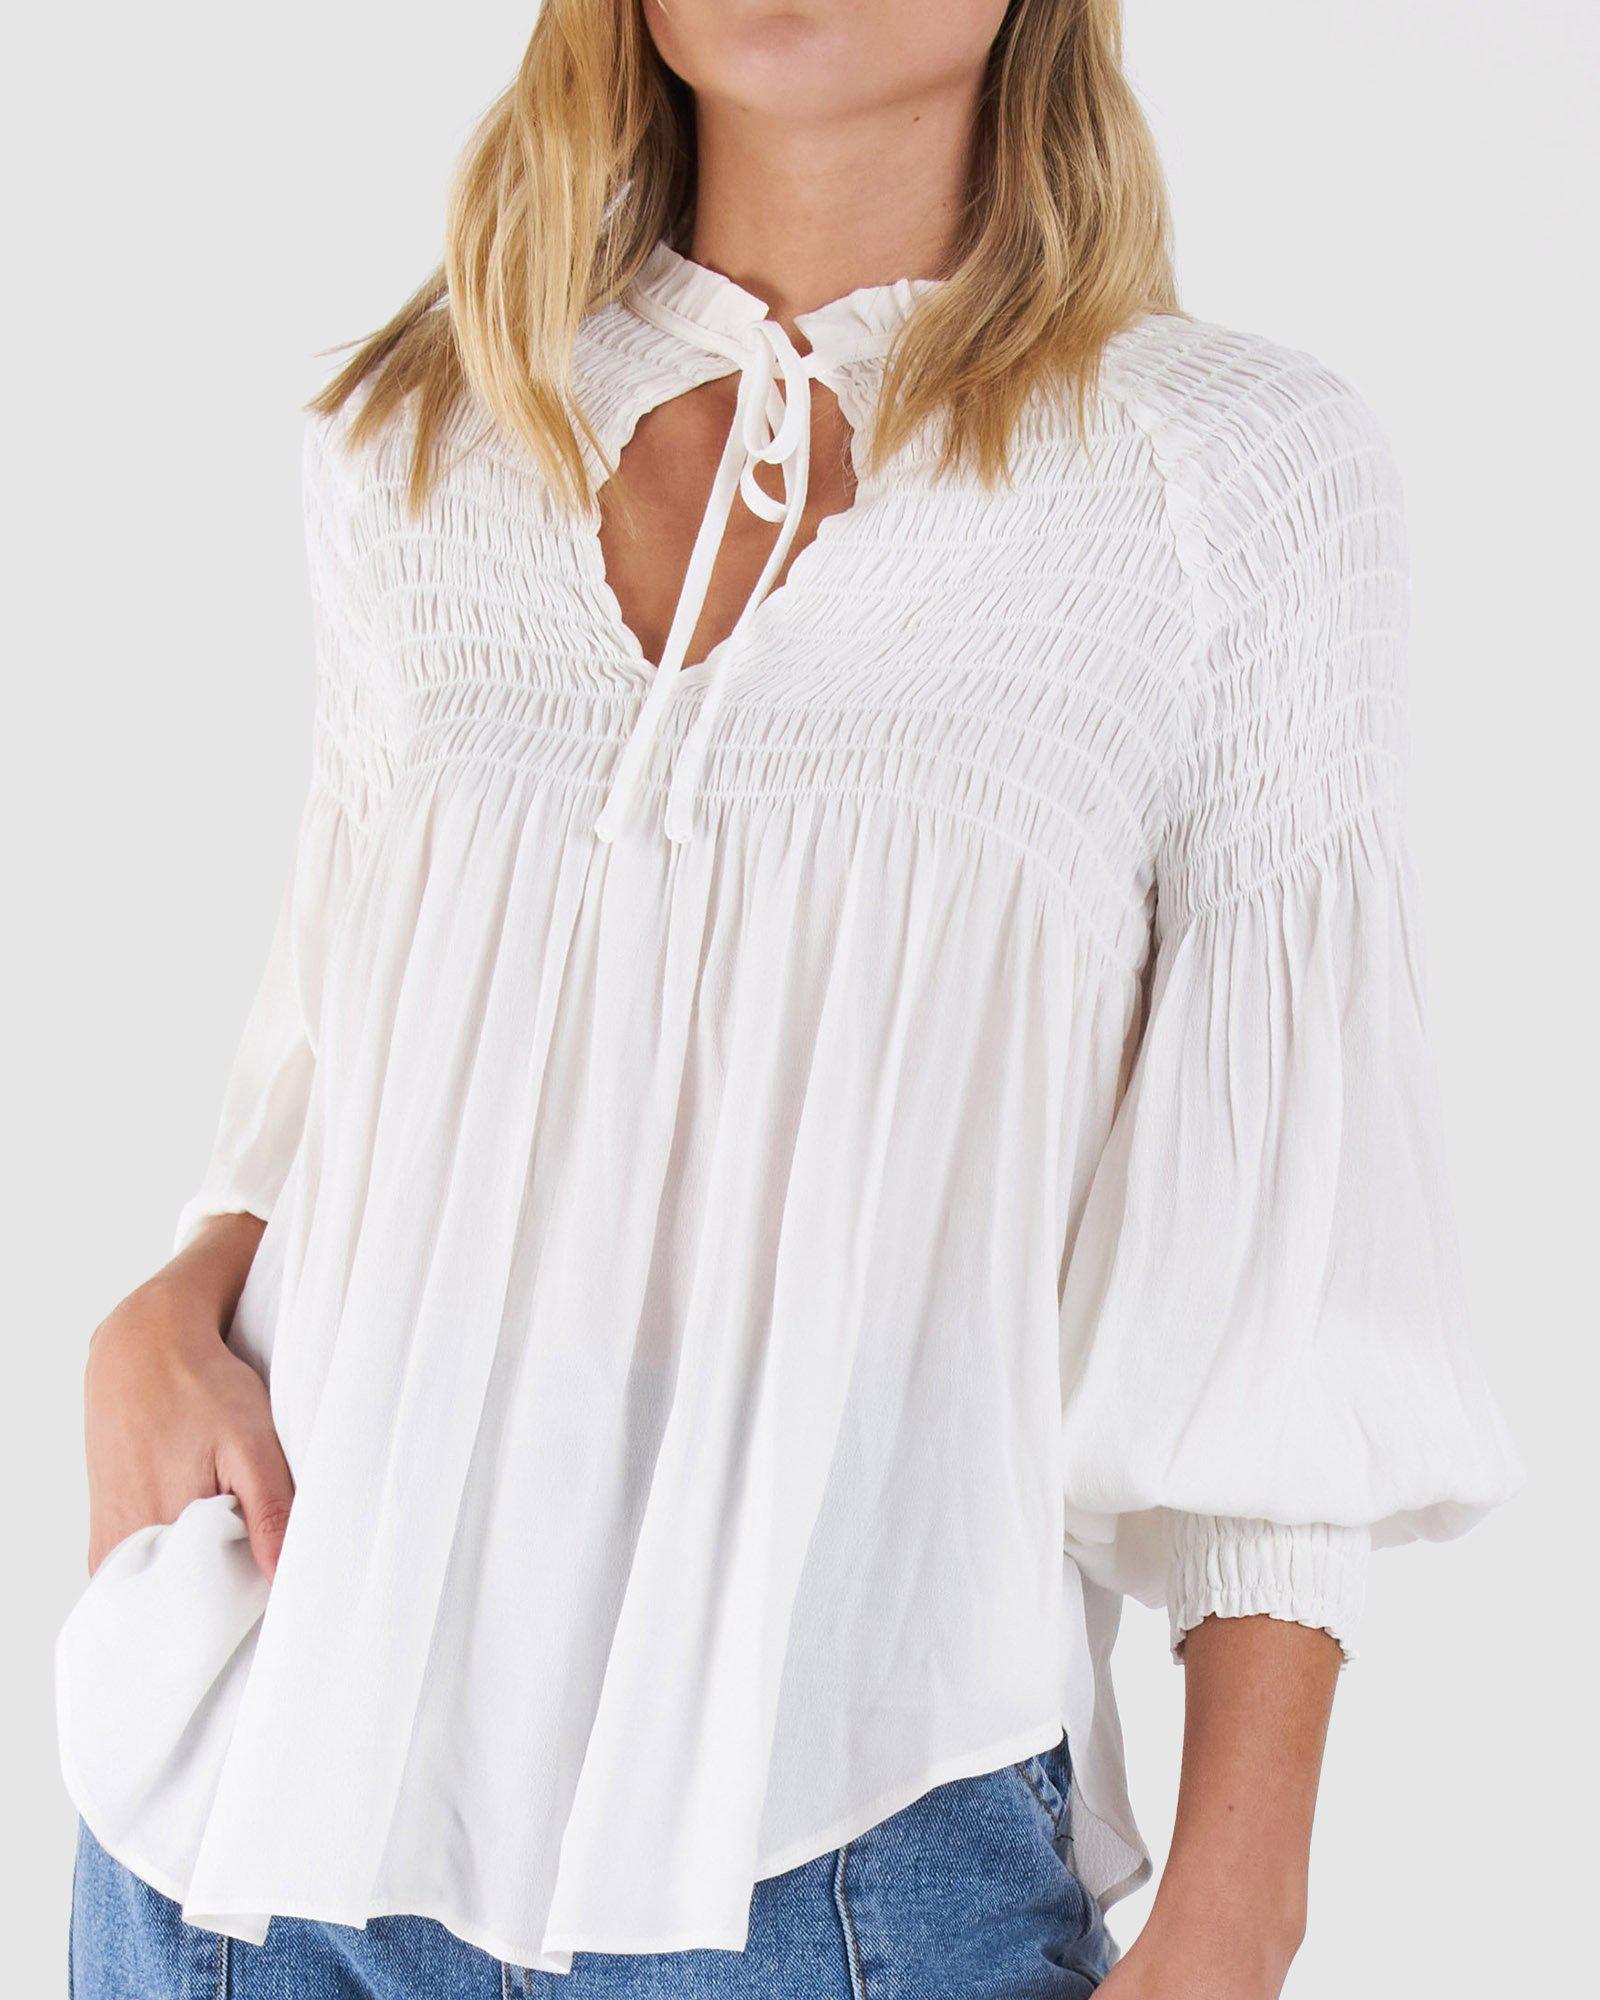 Ada L/S Top - White - Sass - FUDGE Gifts Home Lifestyle